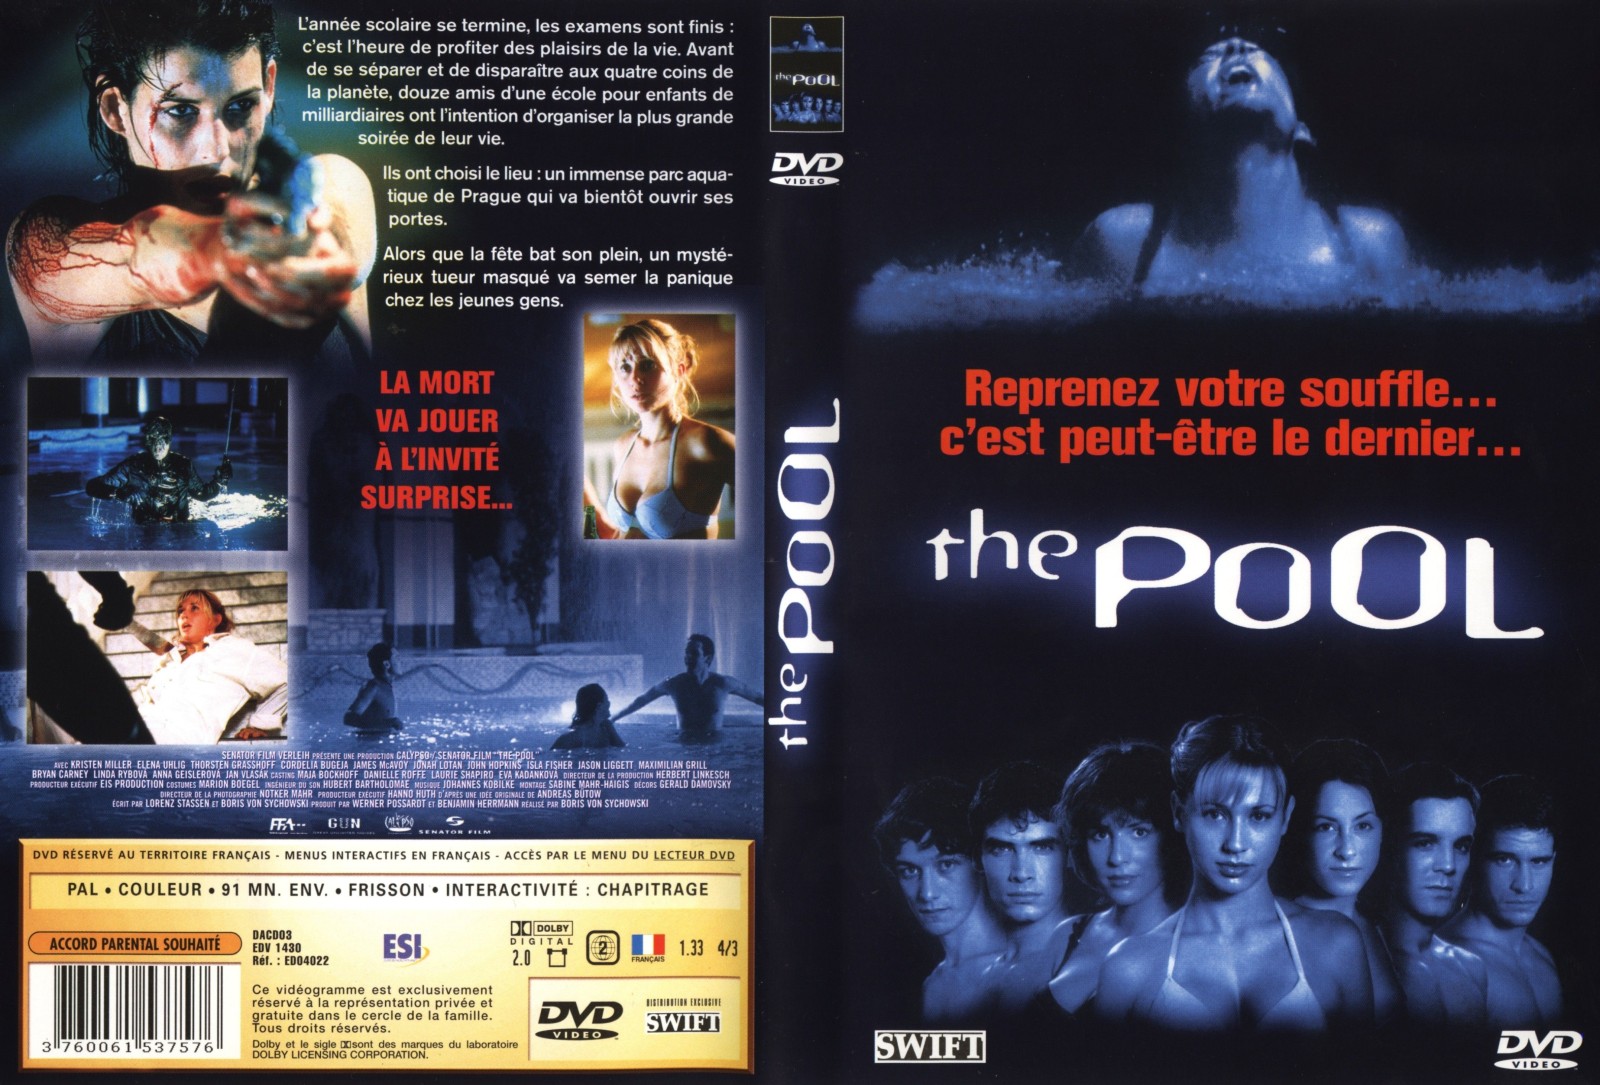 Jaquette DVD The pool